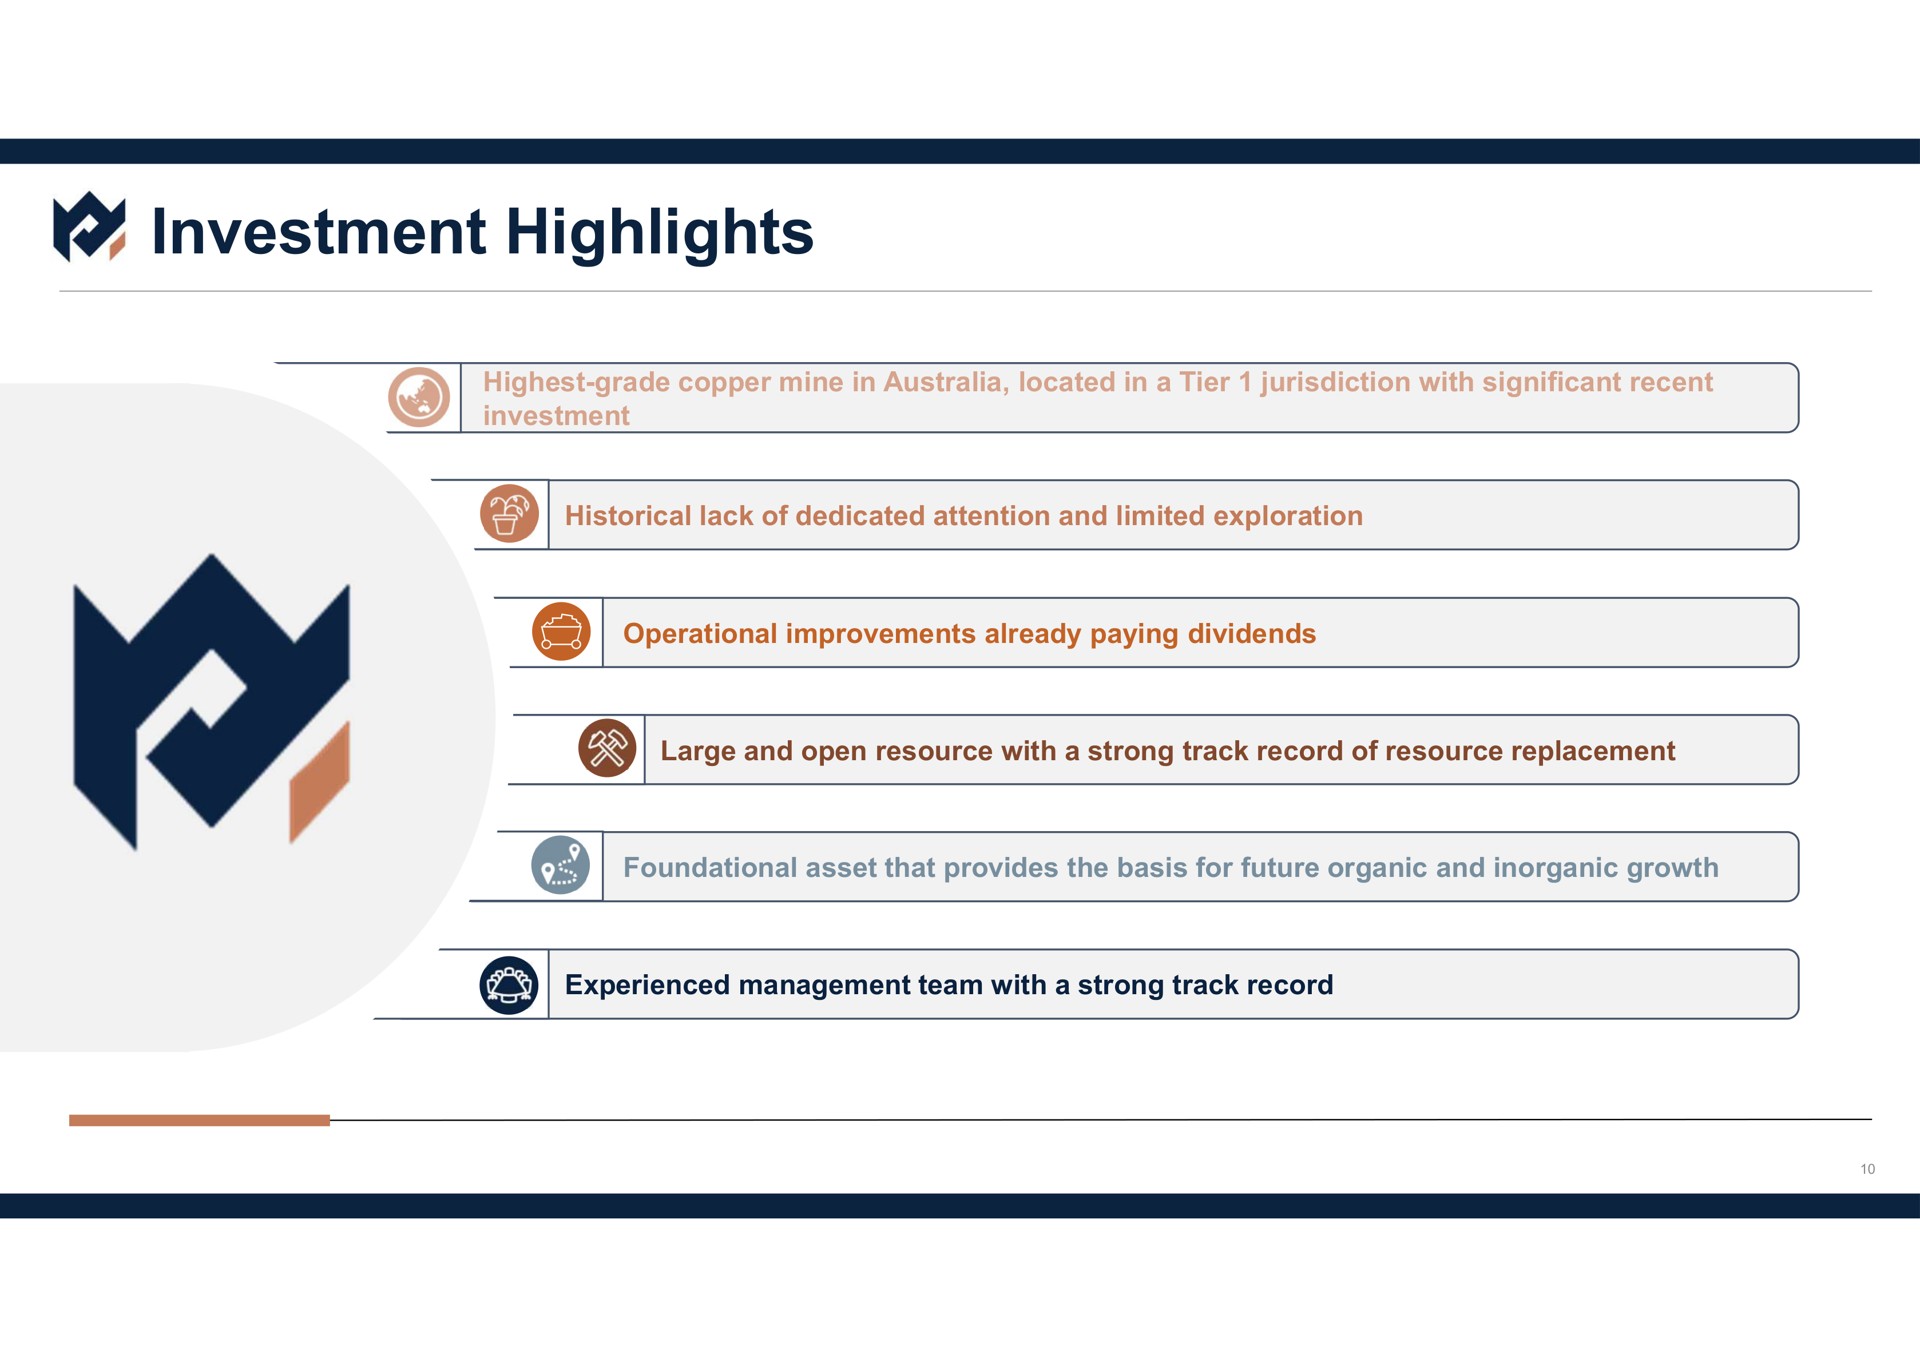 investment highlights | Metals Acquisition Corp